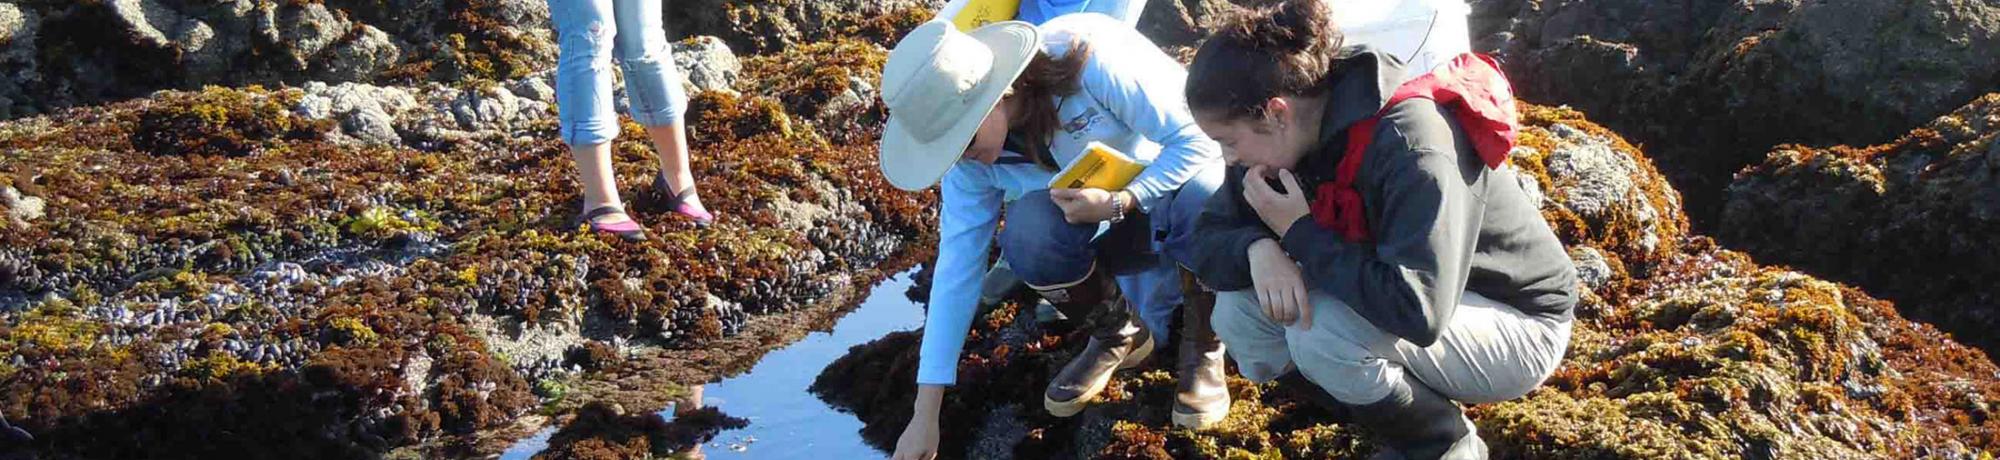 Students in the intertidal